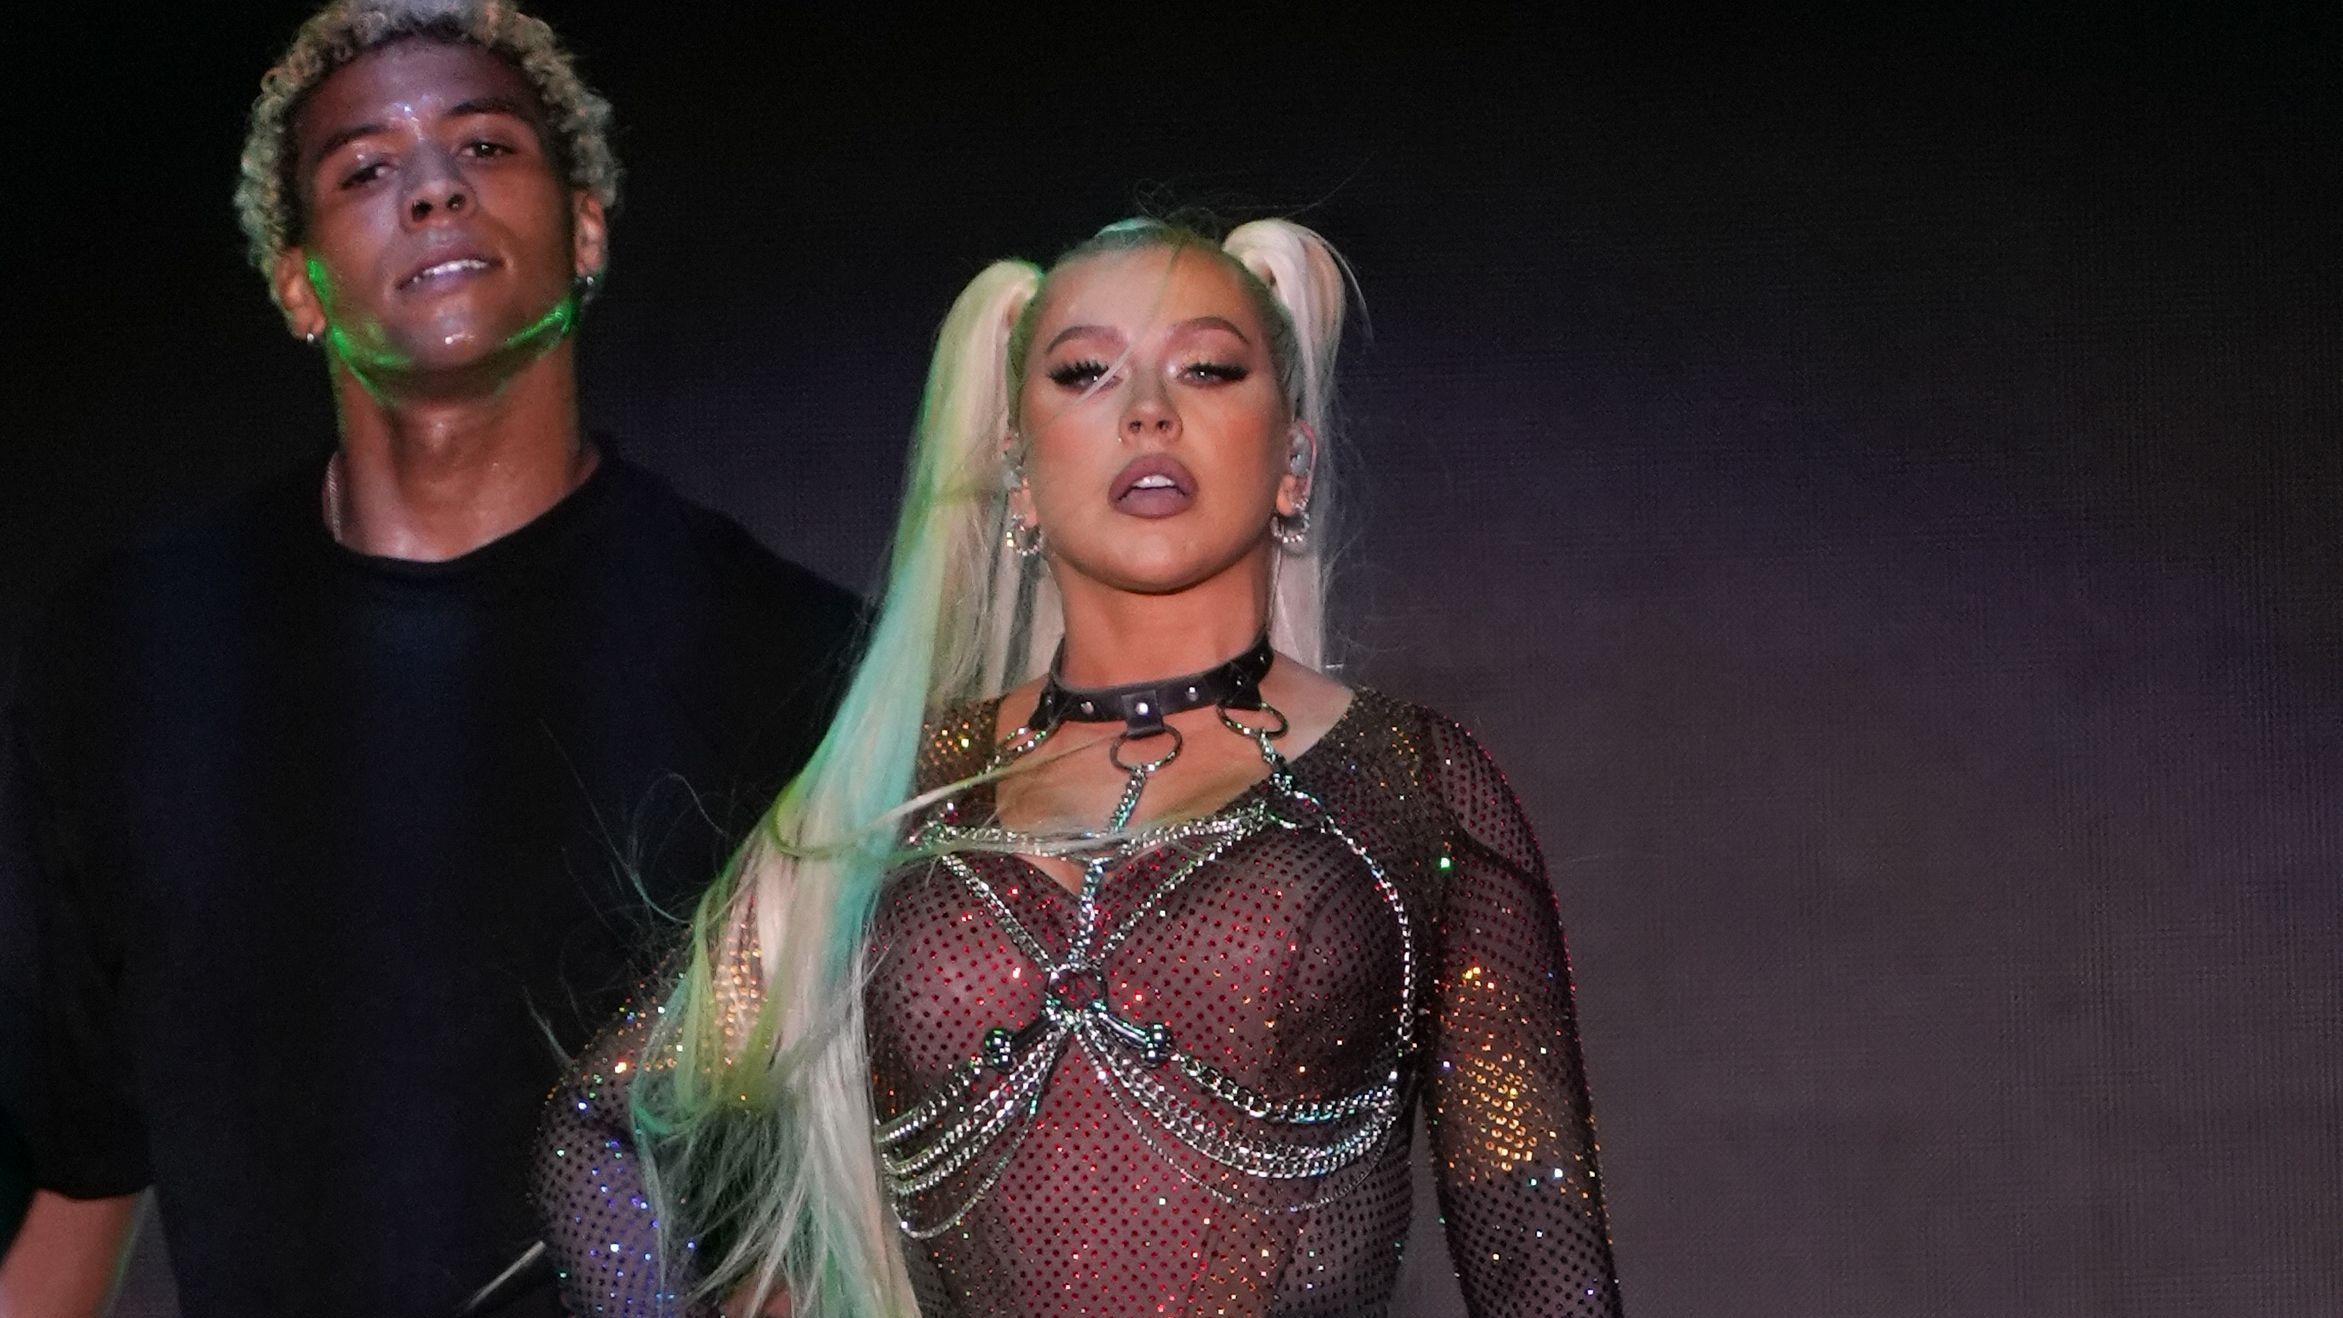 Christina Aguilera Takes the Stage in a Sequined Sheer Bodysuit for Pride